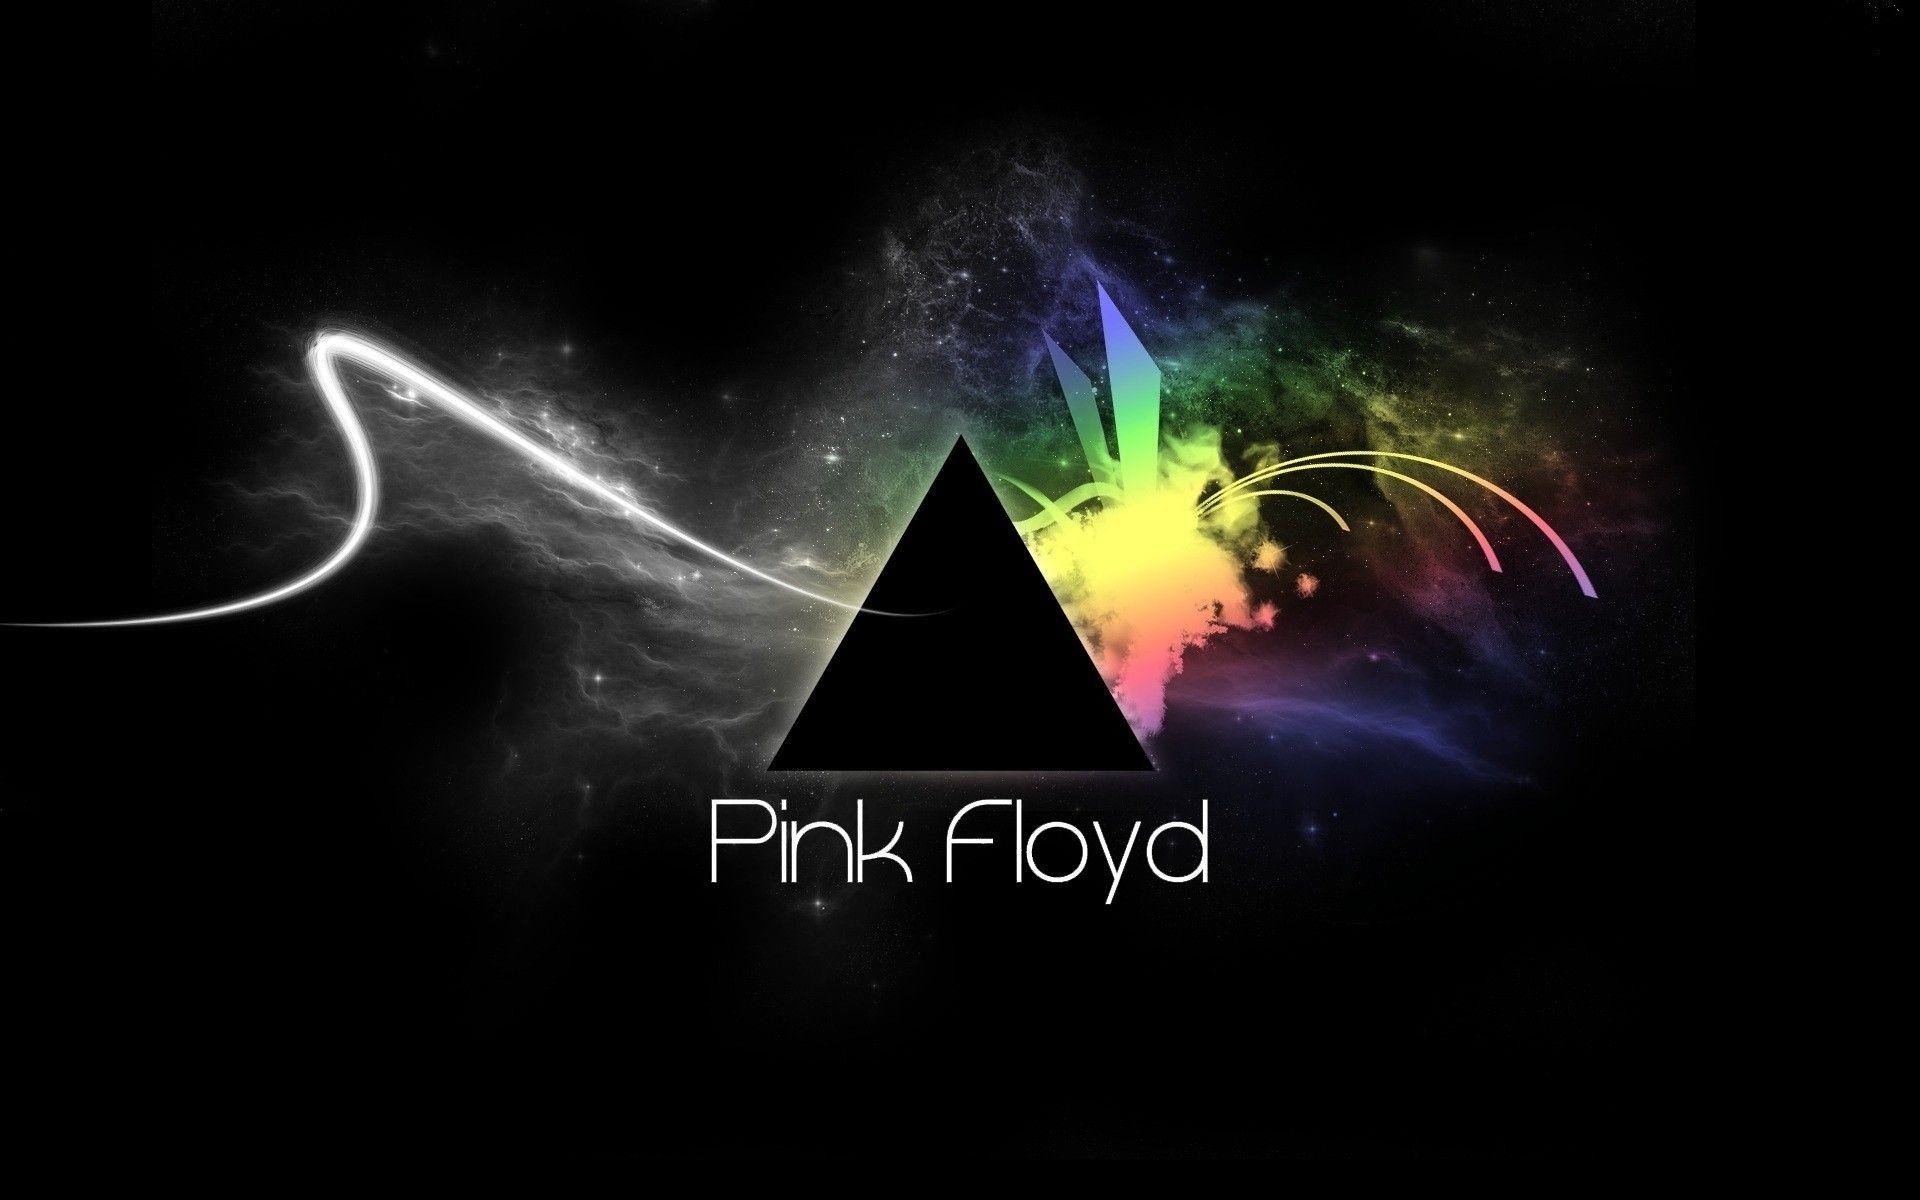 Pink Floyd Logo Design. Android wallpaper for free